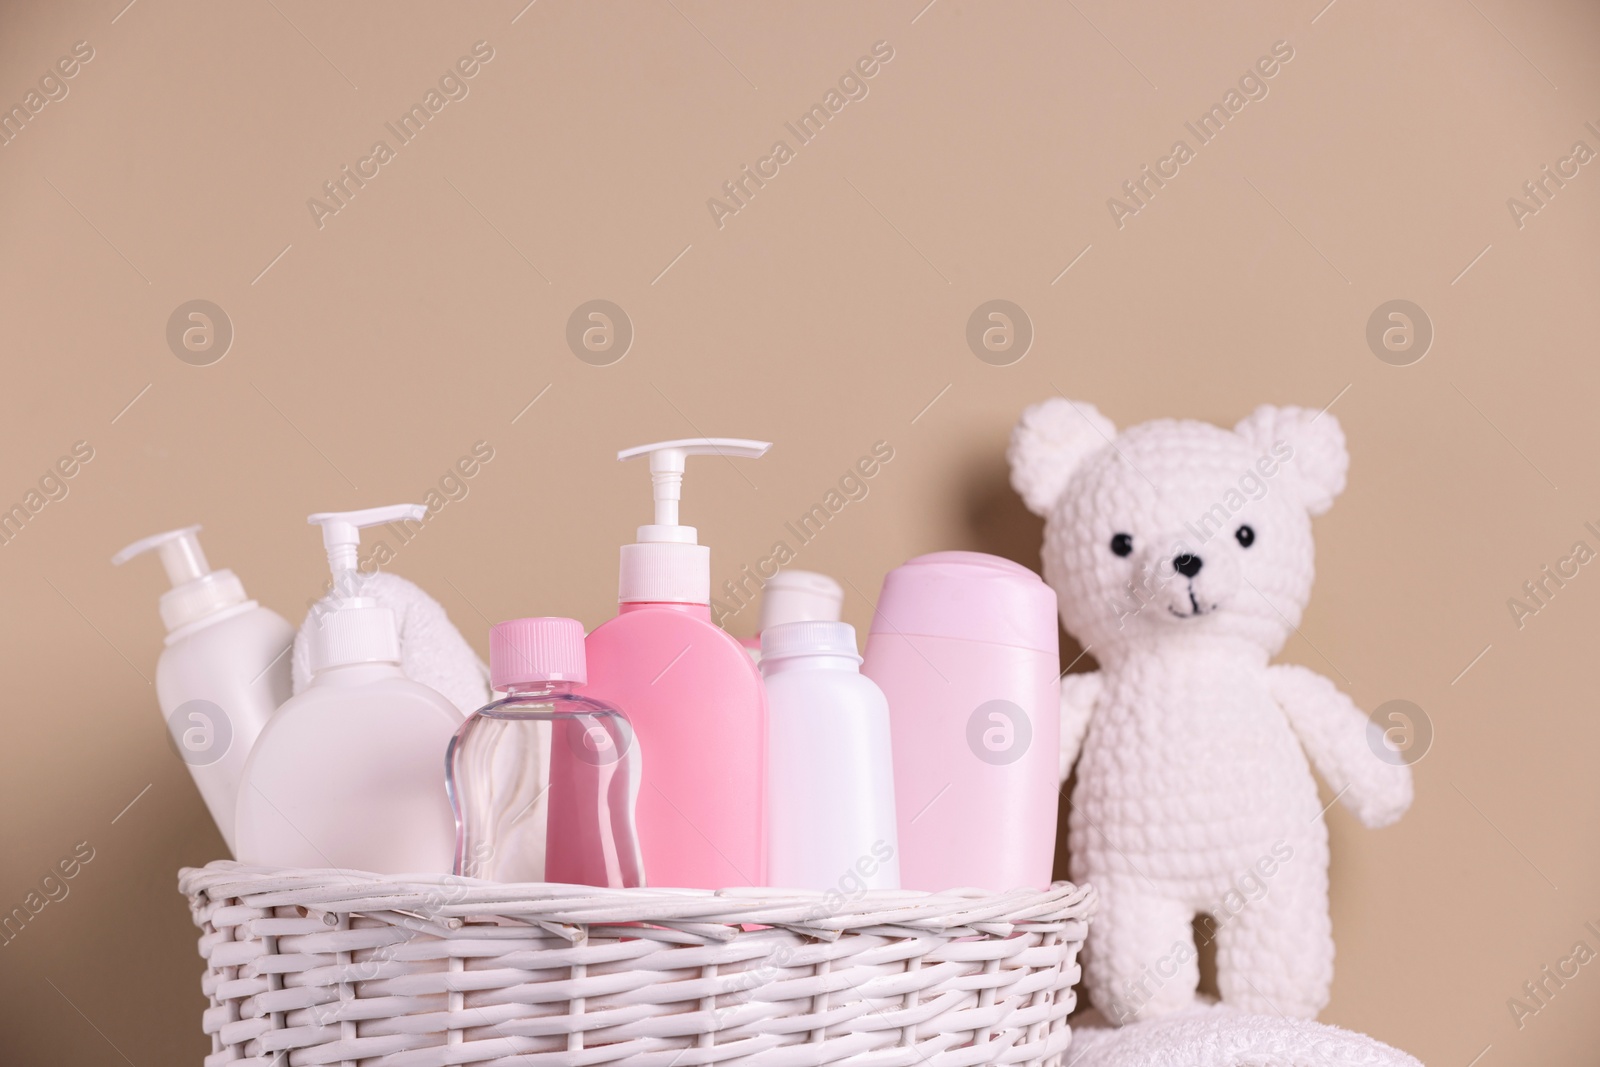 Photo of Wicker basket with baby cosmetic products and knitted toy bear on beige background